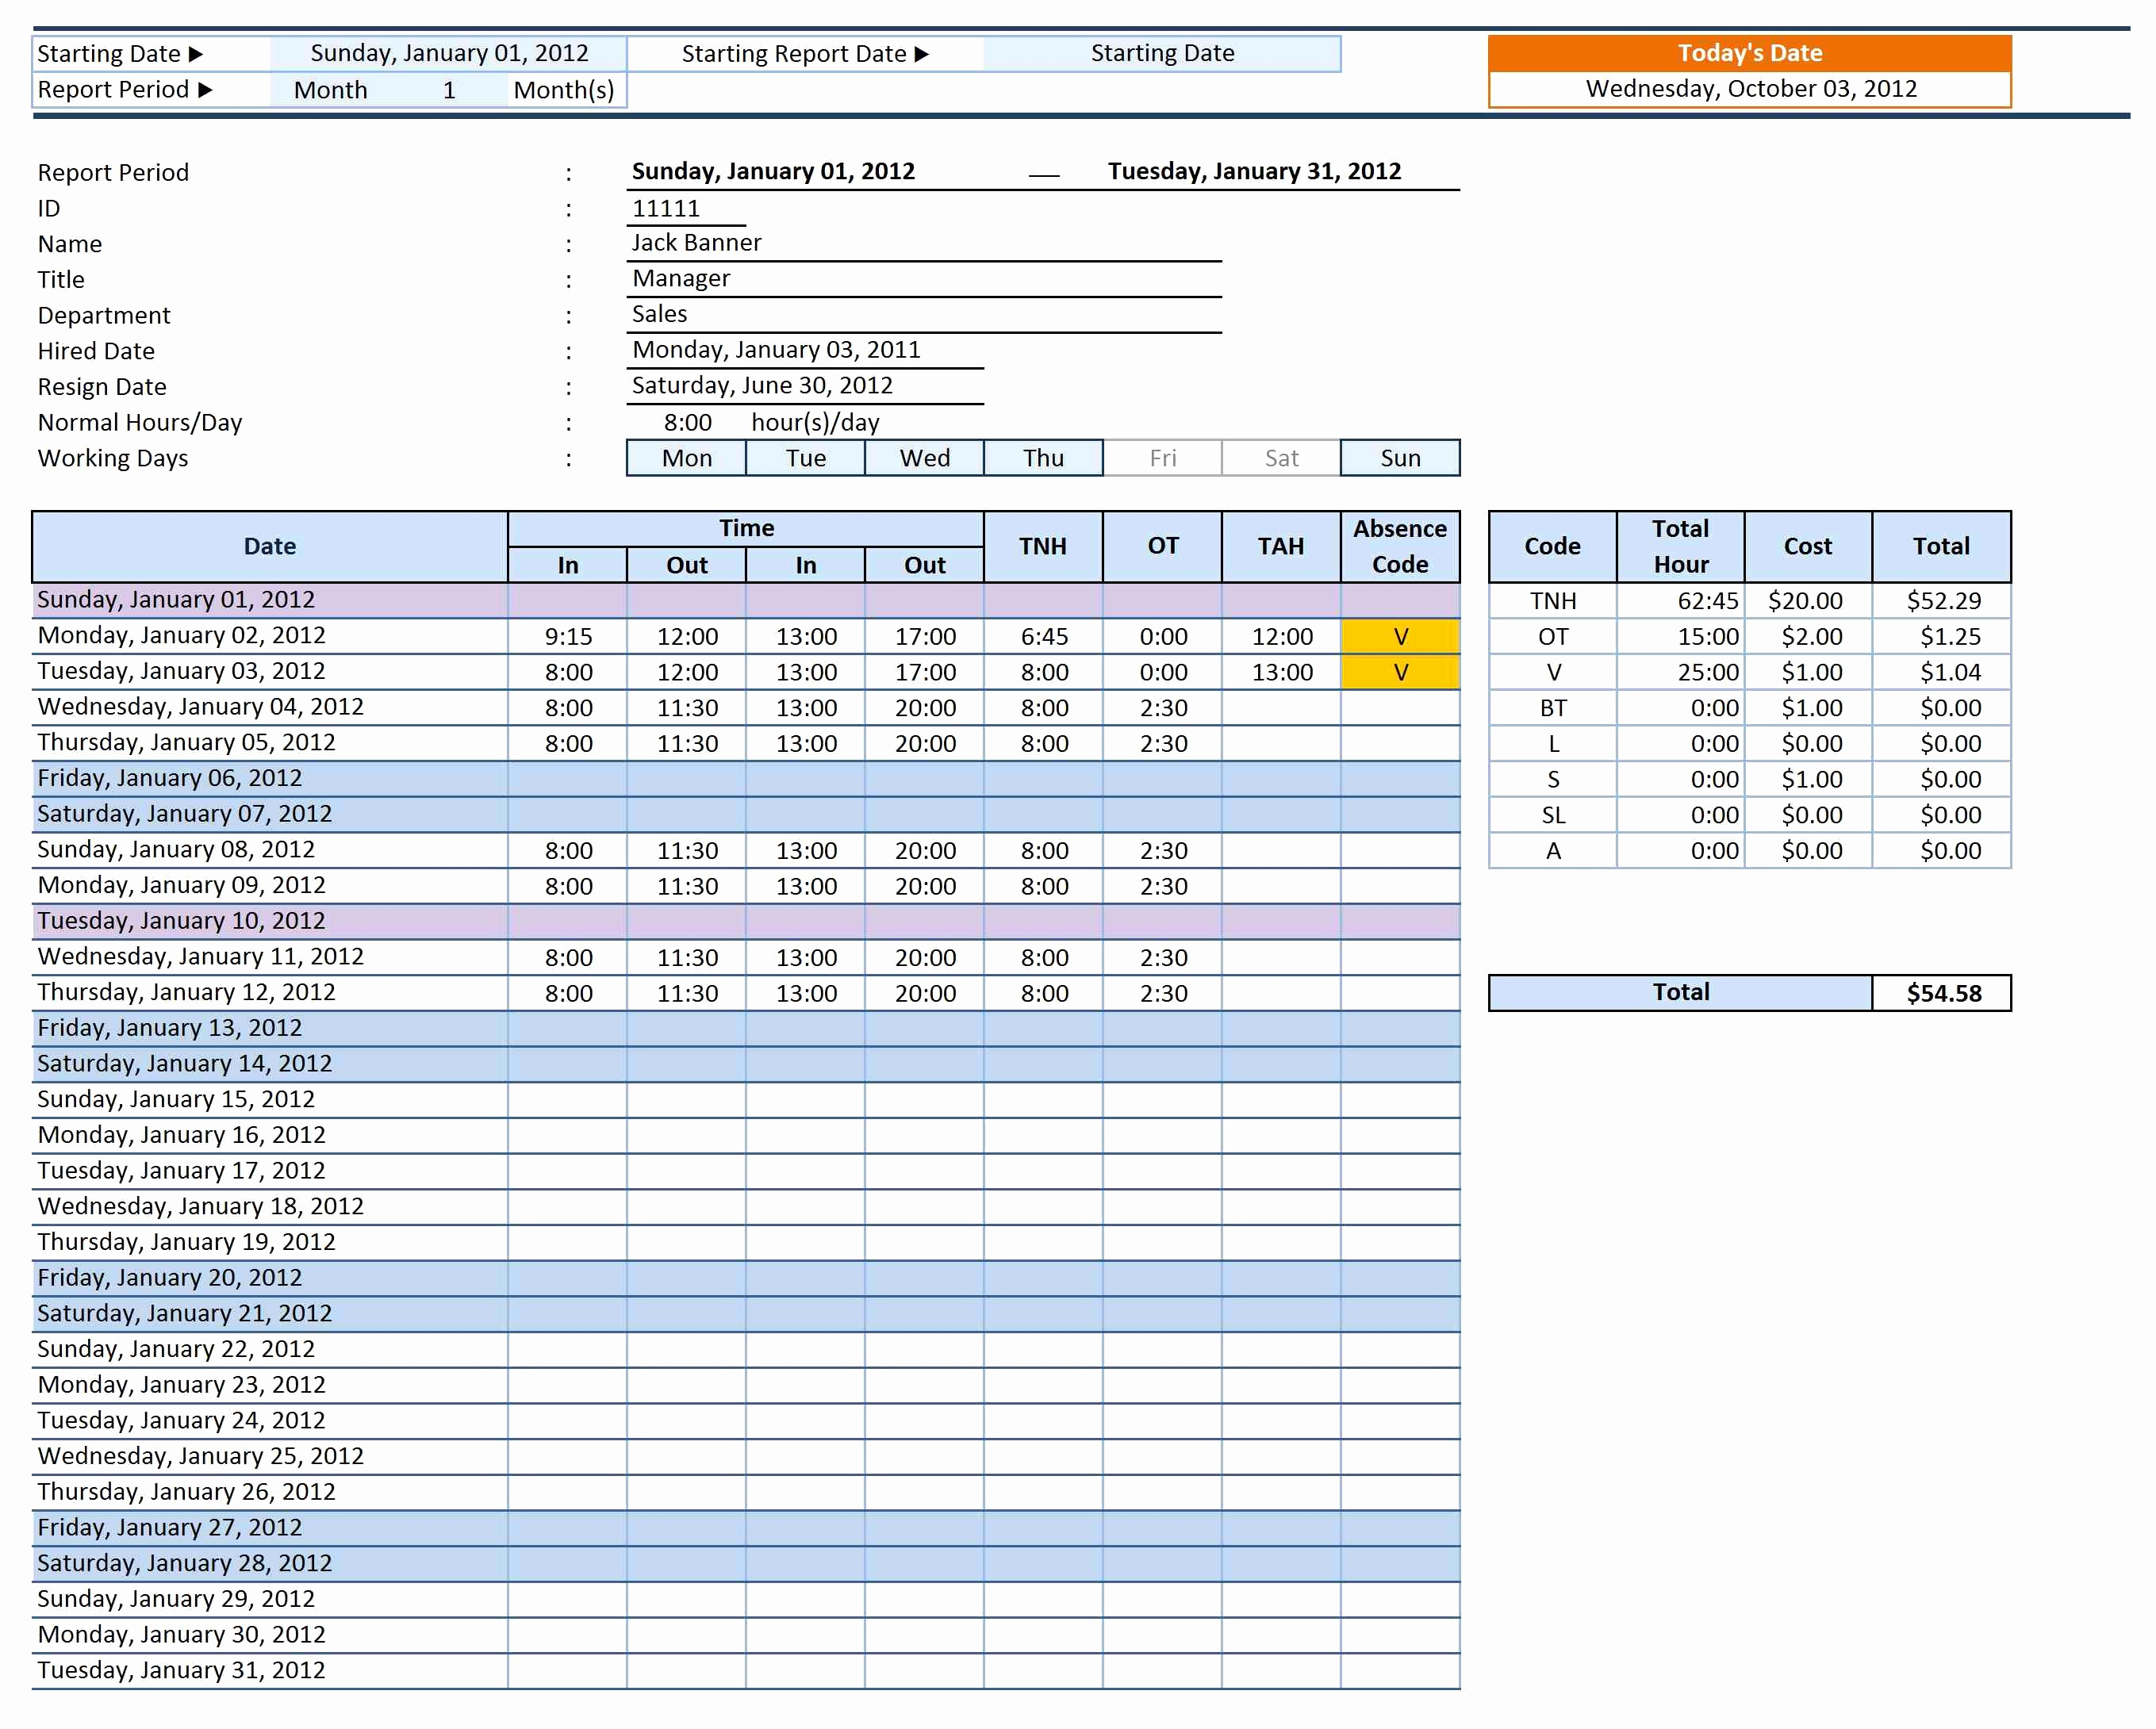 Ebs Timesheet Functional Daily Time Tracking Spreadsheet Best Free intended for Time Tracking Spreadsheet